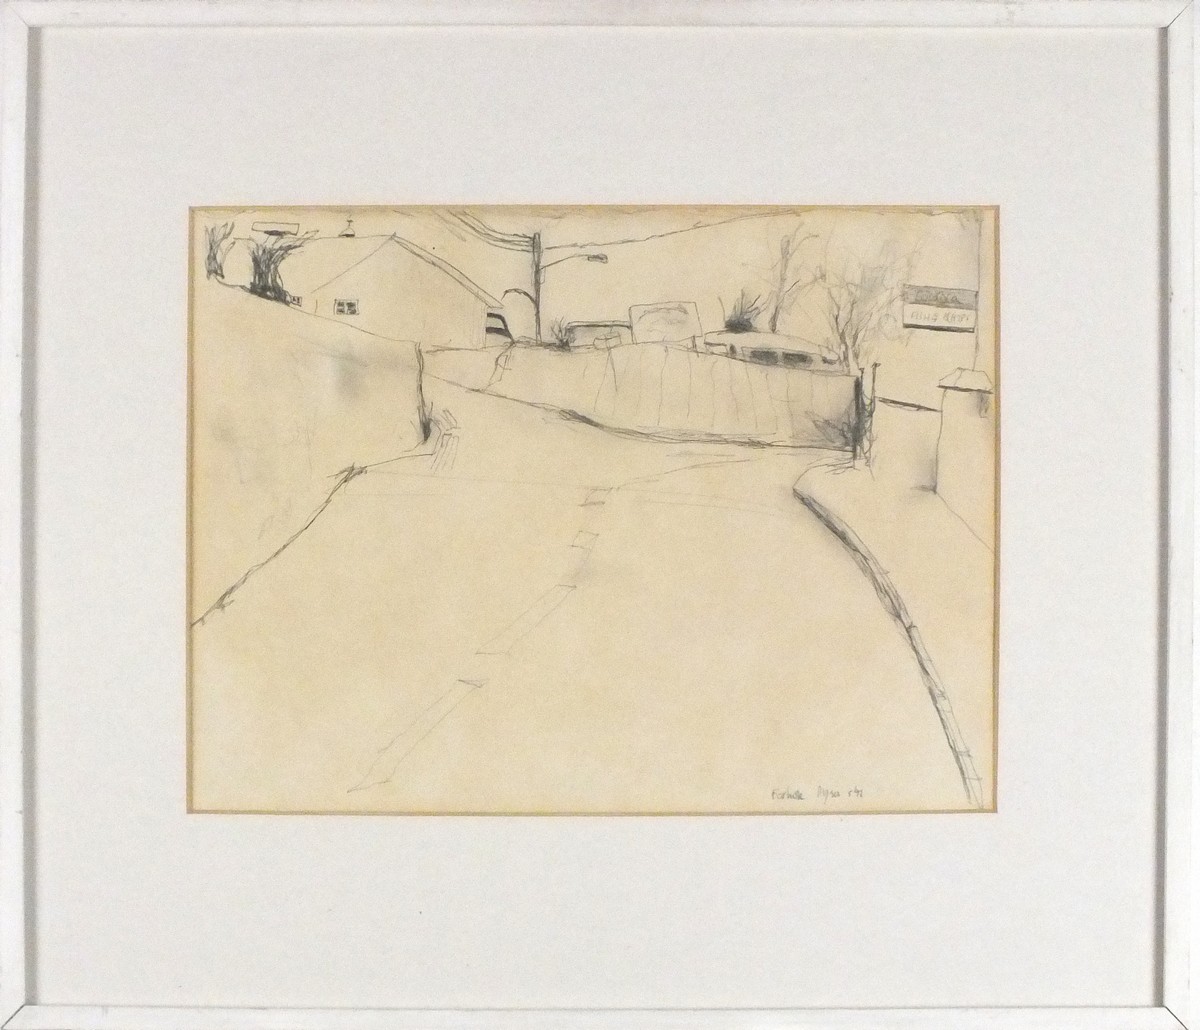 Julian DYSON (British 1936-2003) Foxhole - Cornwall, Pencil on paper, Signed, titled and dated 5 '91 - Image 2 of 2